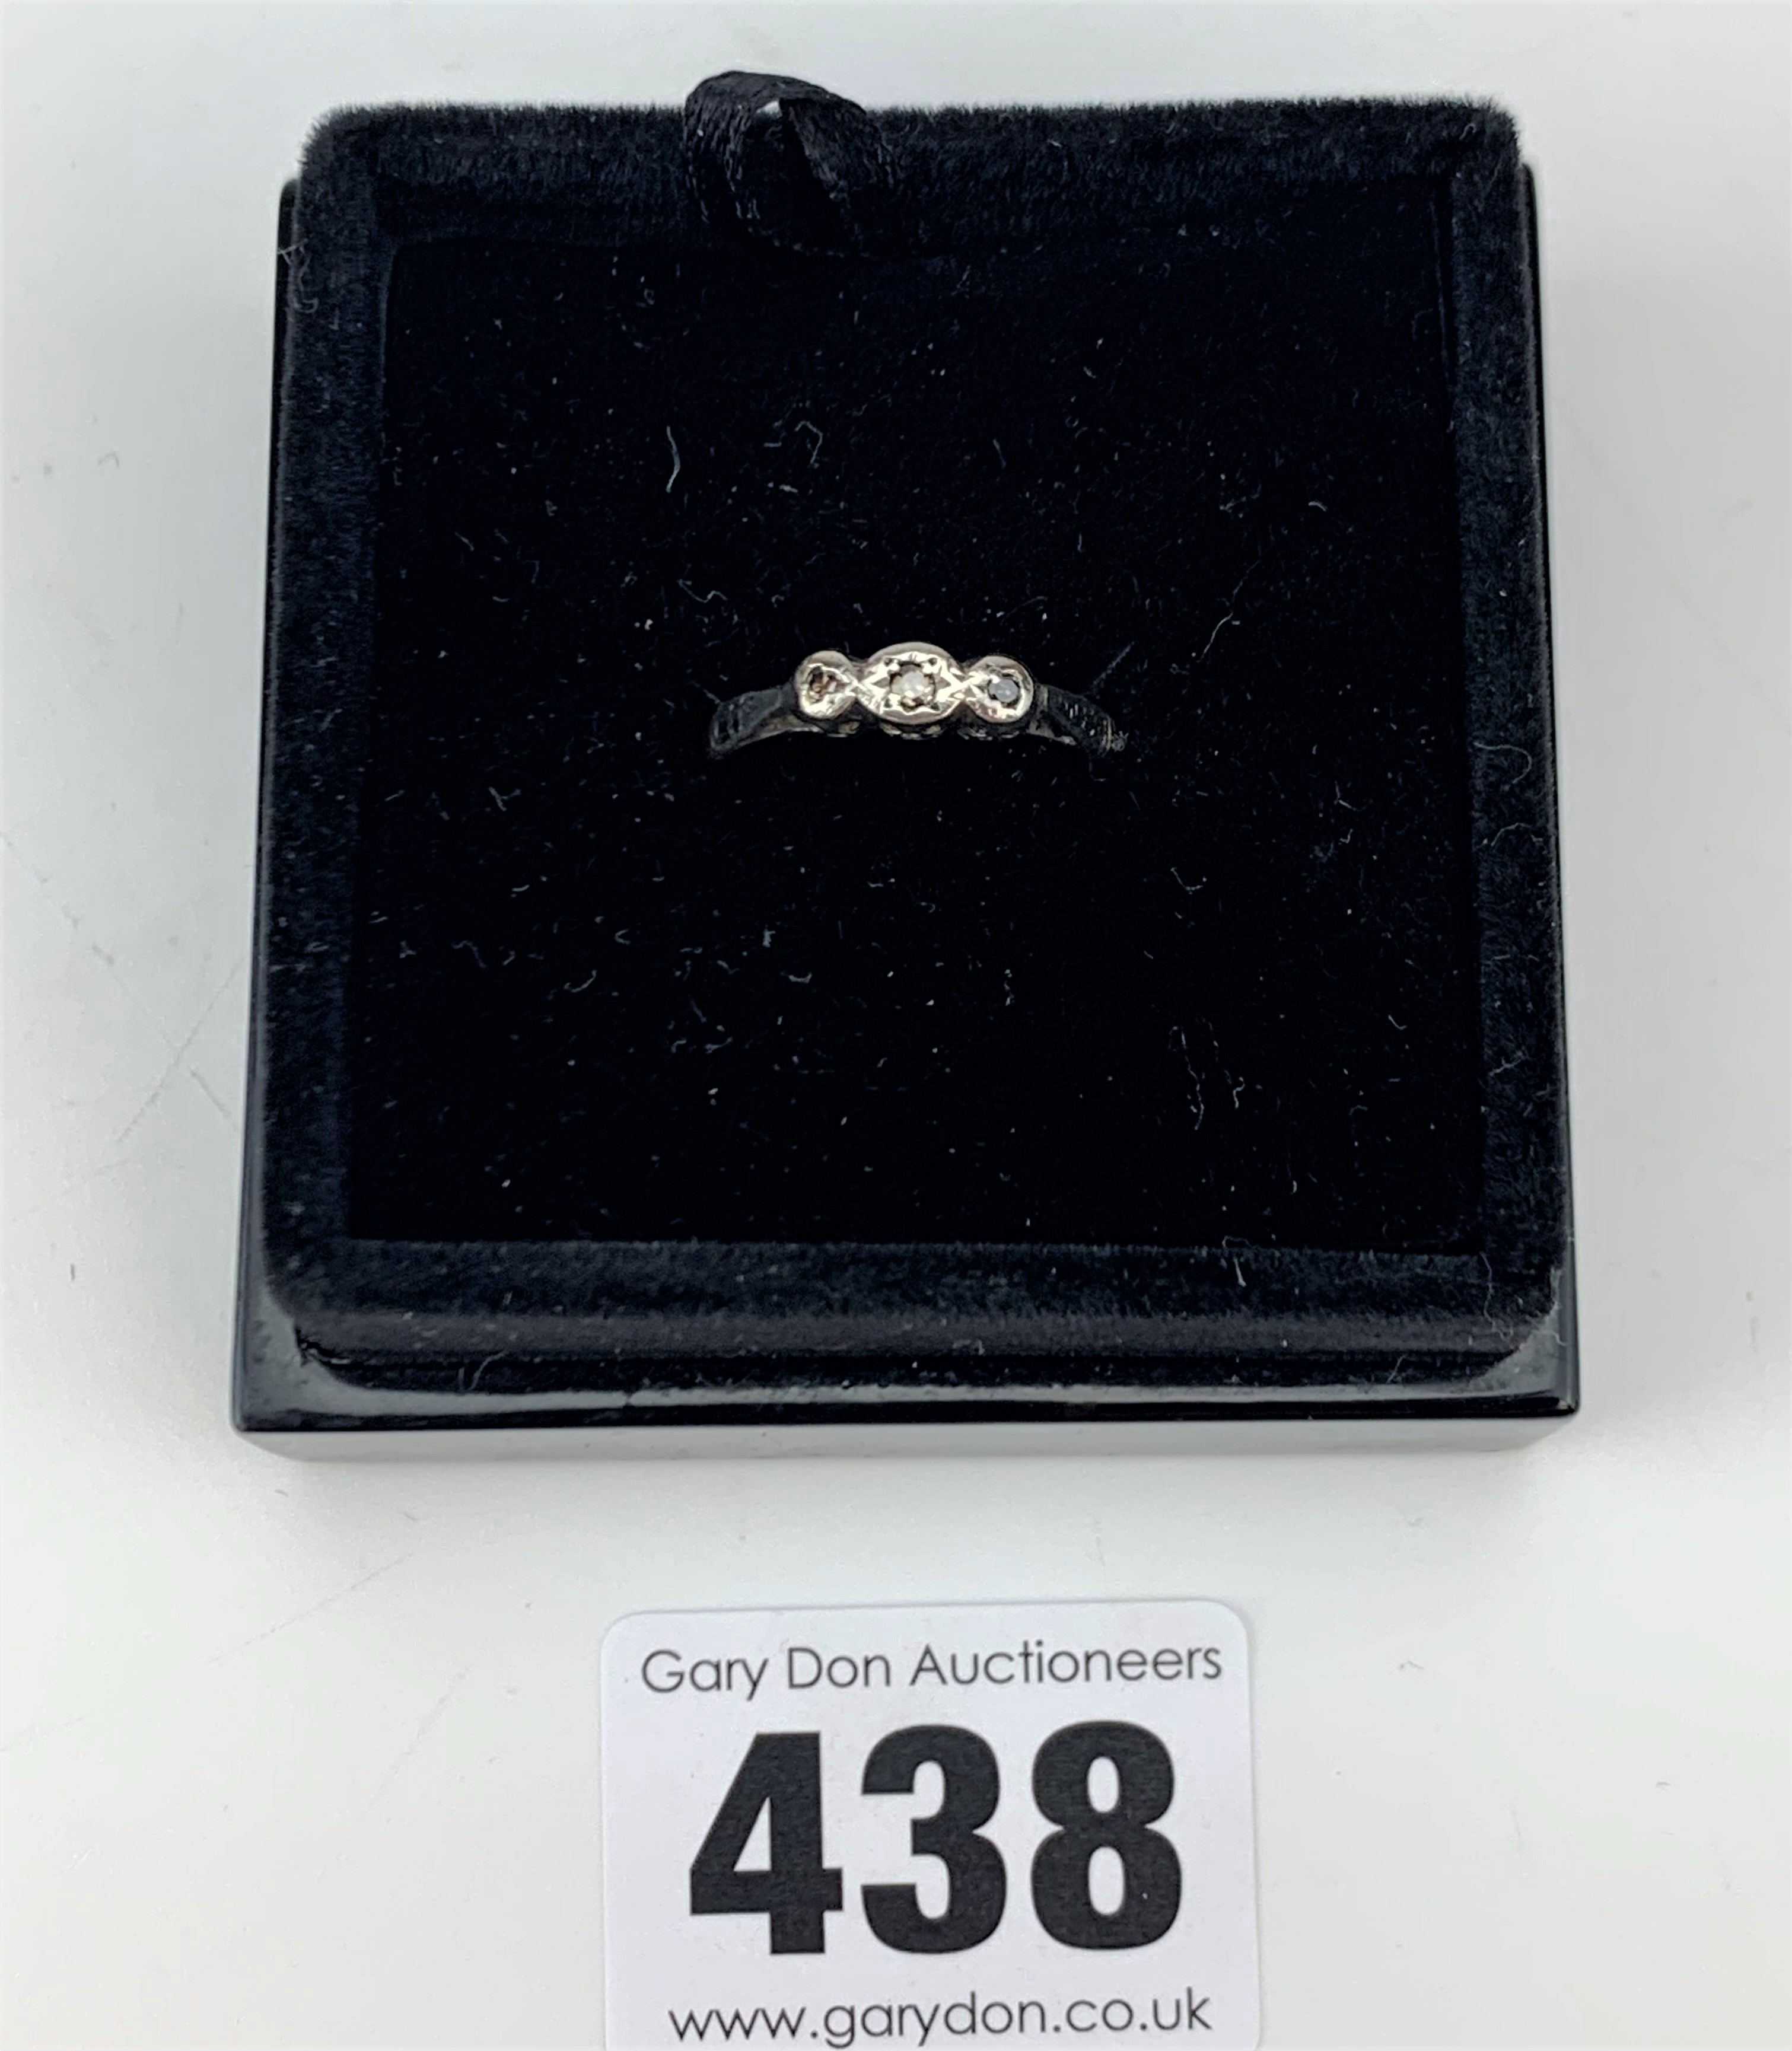 9k gold and platinum ring - Image 2 of 7